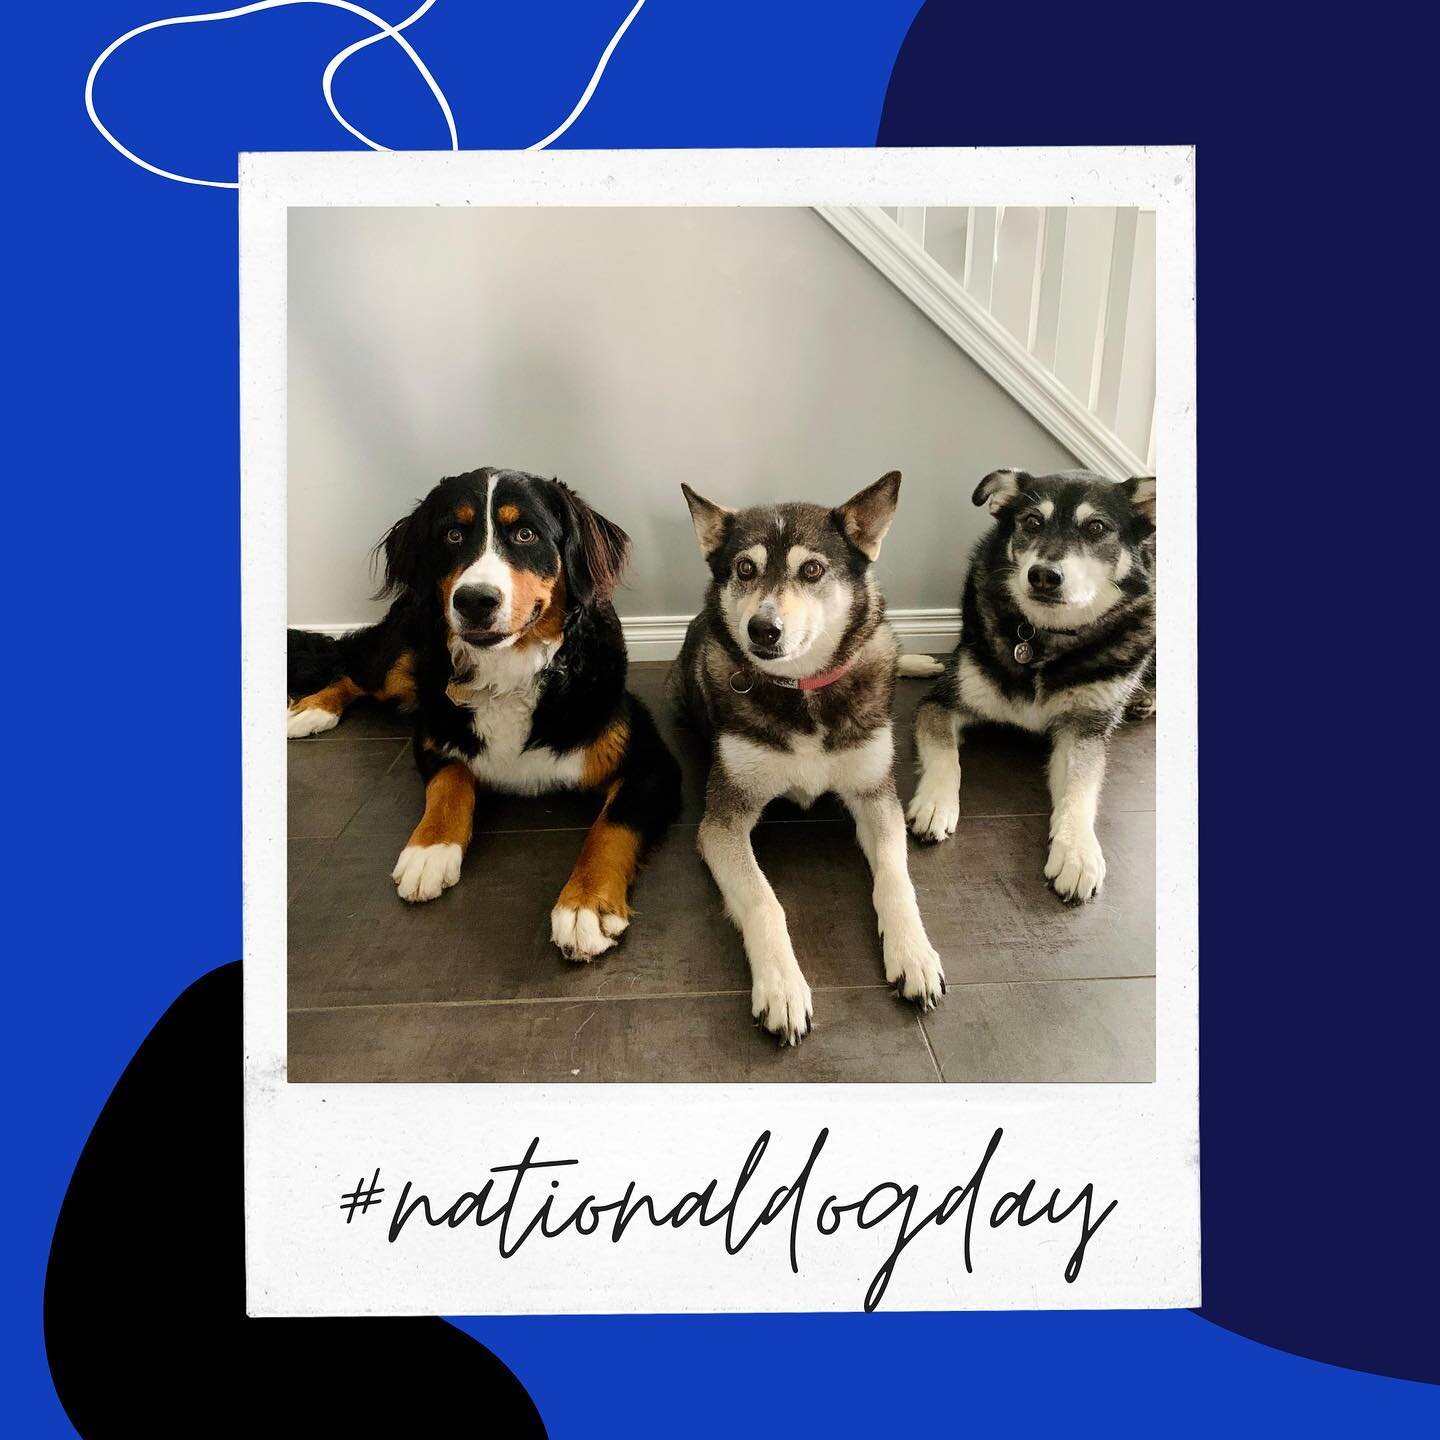 These three are keeping us on our toes this week but those tail wags can make anyone&rsquo;s day better. #nationaldogday #dogsofinsta #twooldiesandababy 🐻🐺🐺